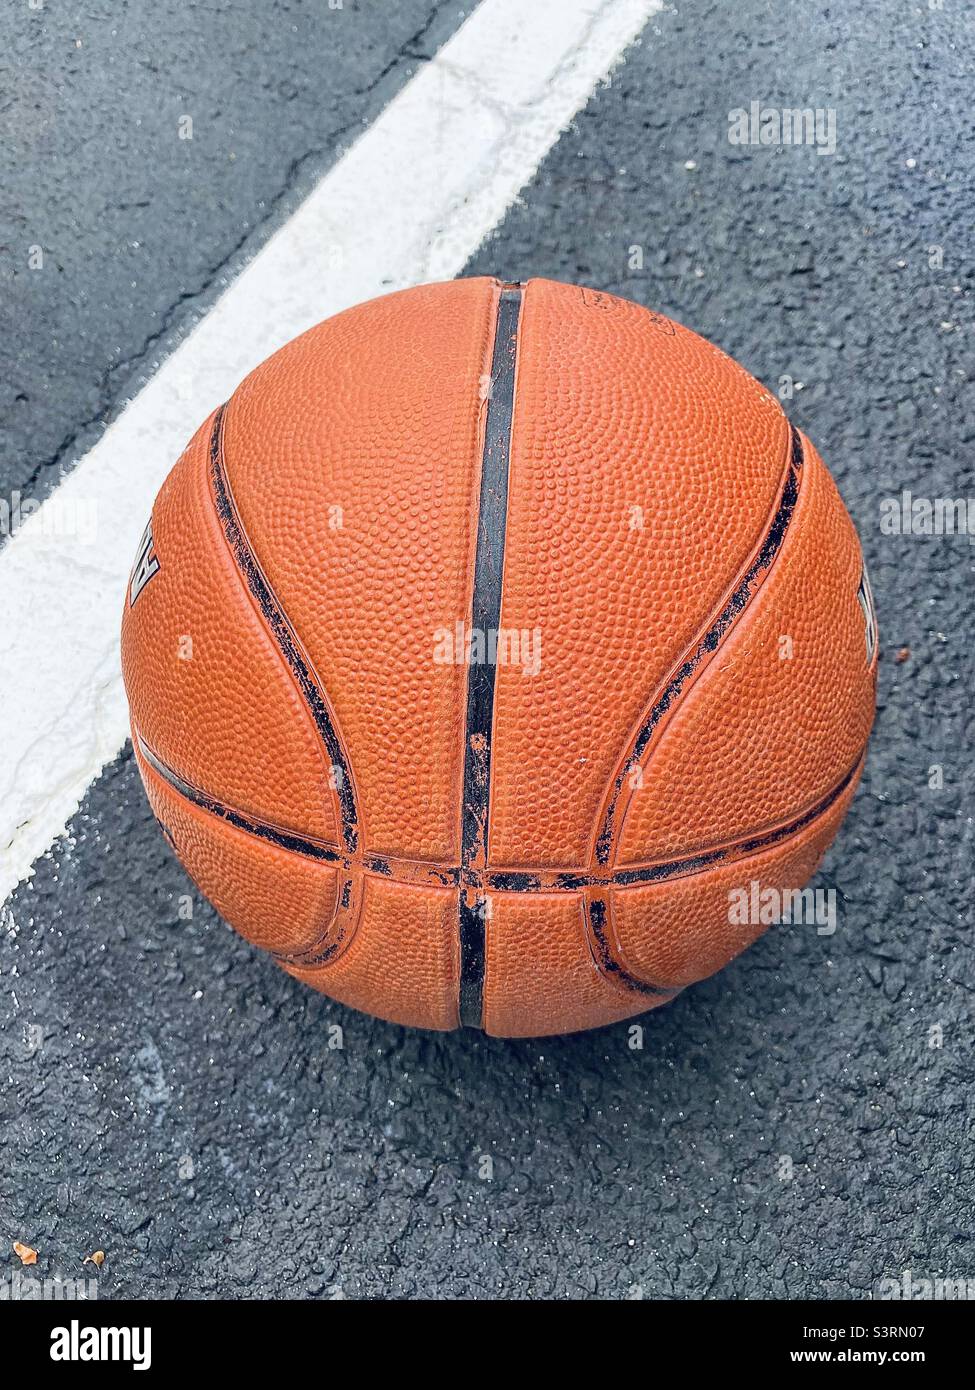 A game of basketball! Stock Photo